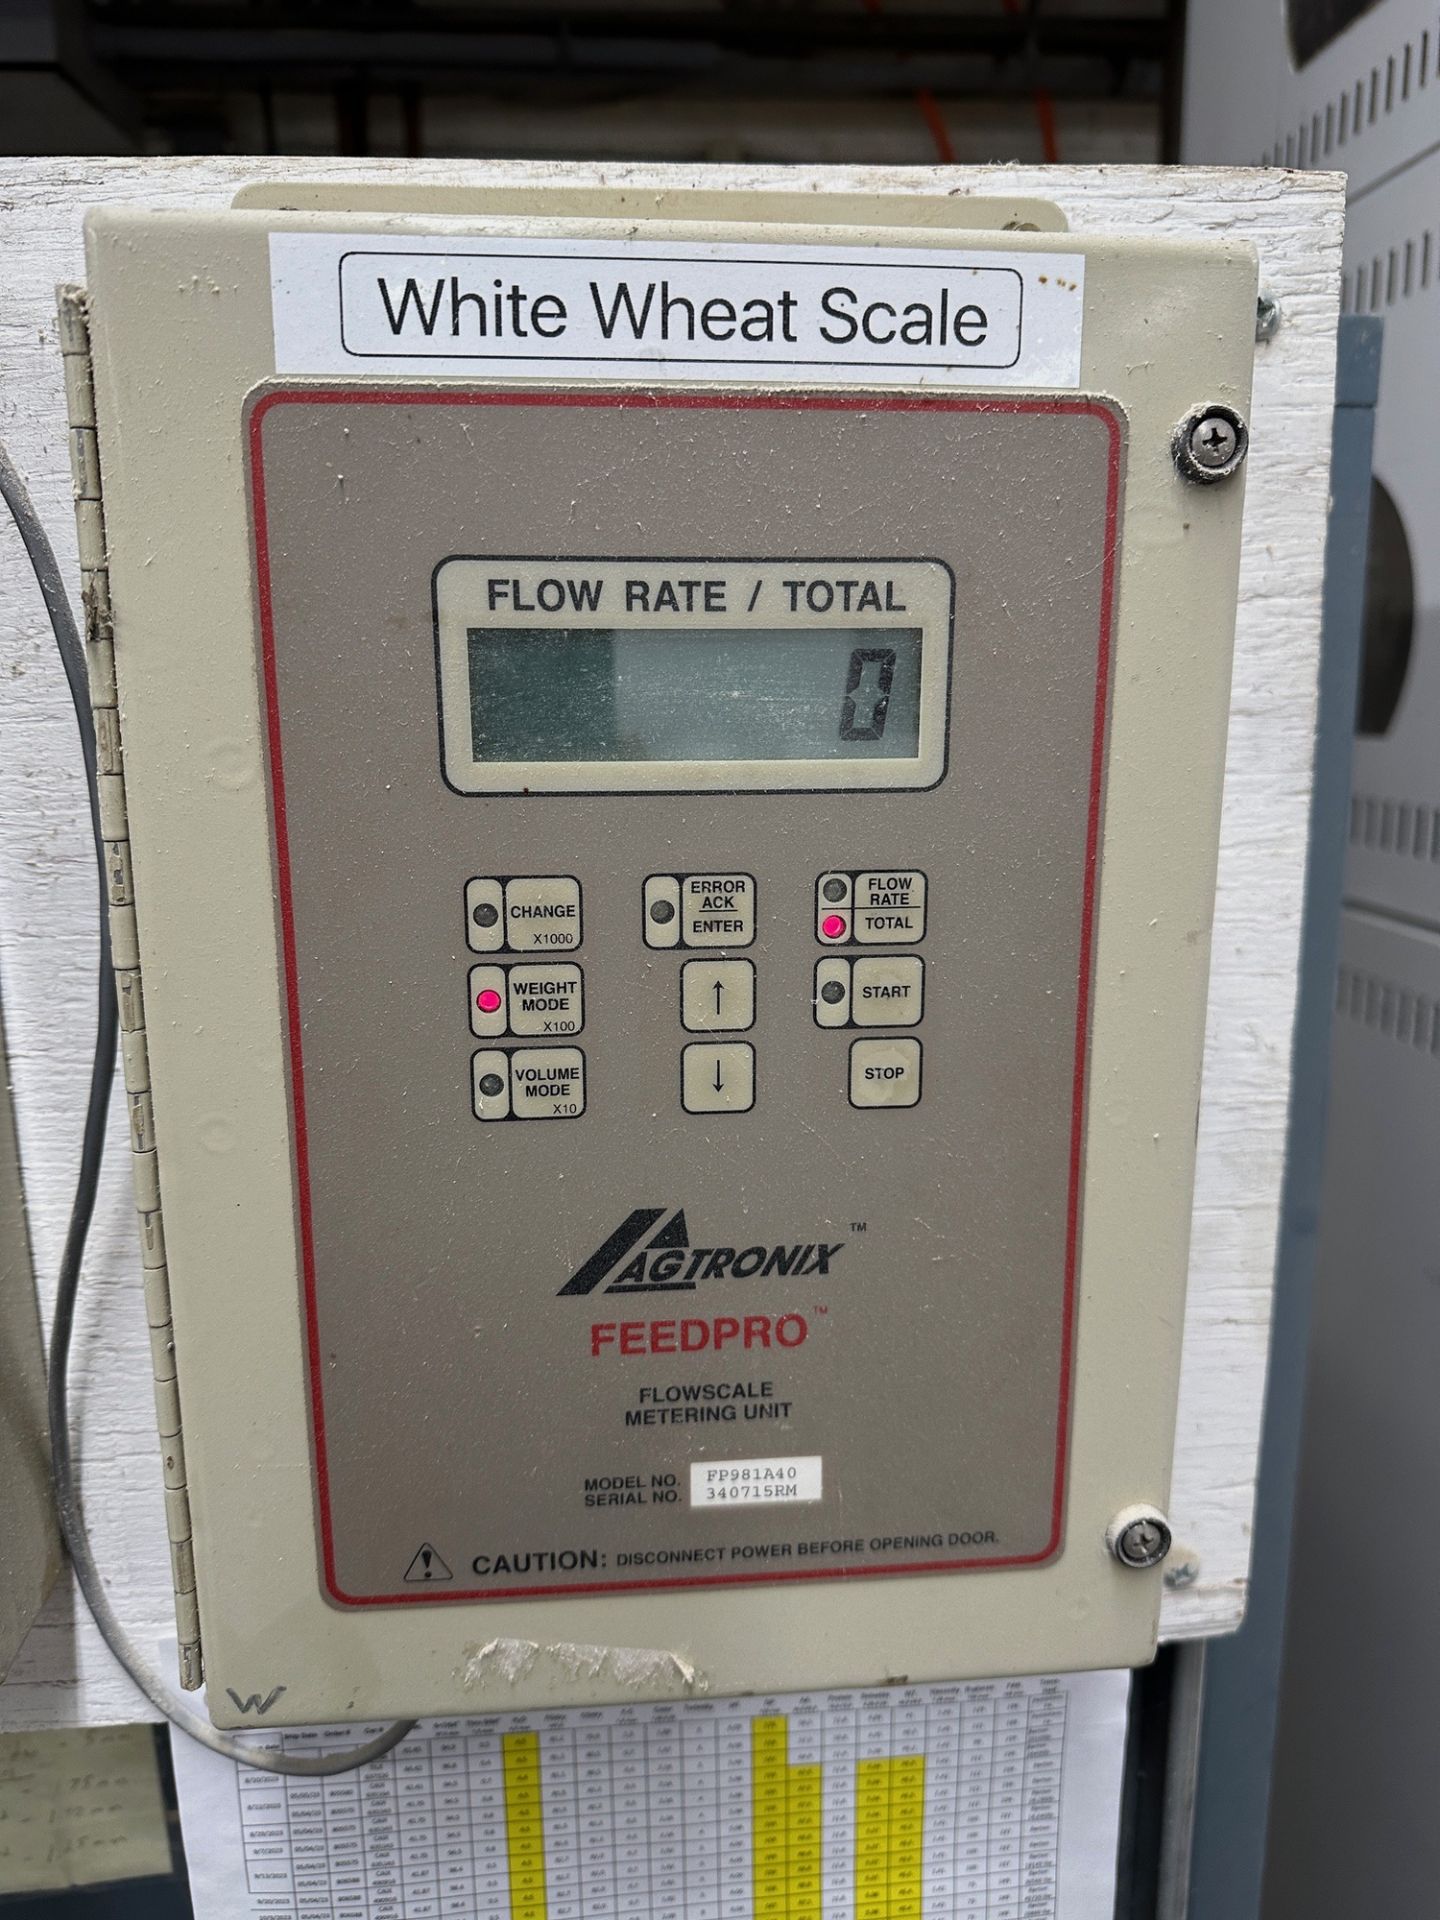 Agtronix Feedpro Flowscale Metering Unit (Wheat) - Model FP981A40 - S/N 340715 | Rig Fee $500 - Image 3 of 3